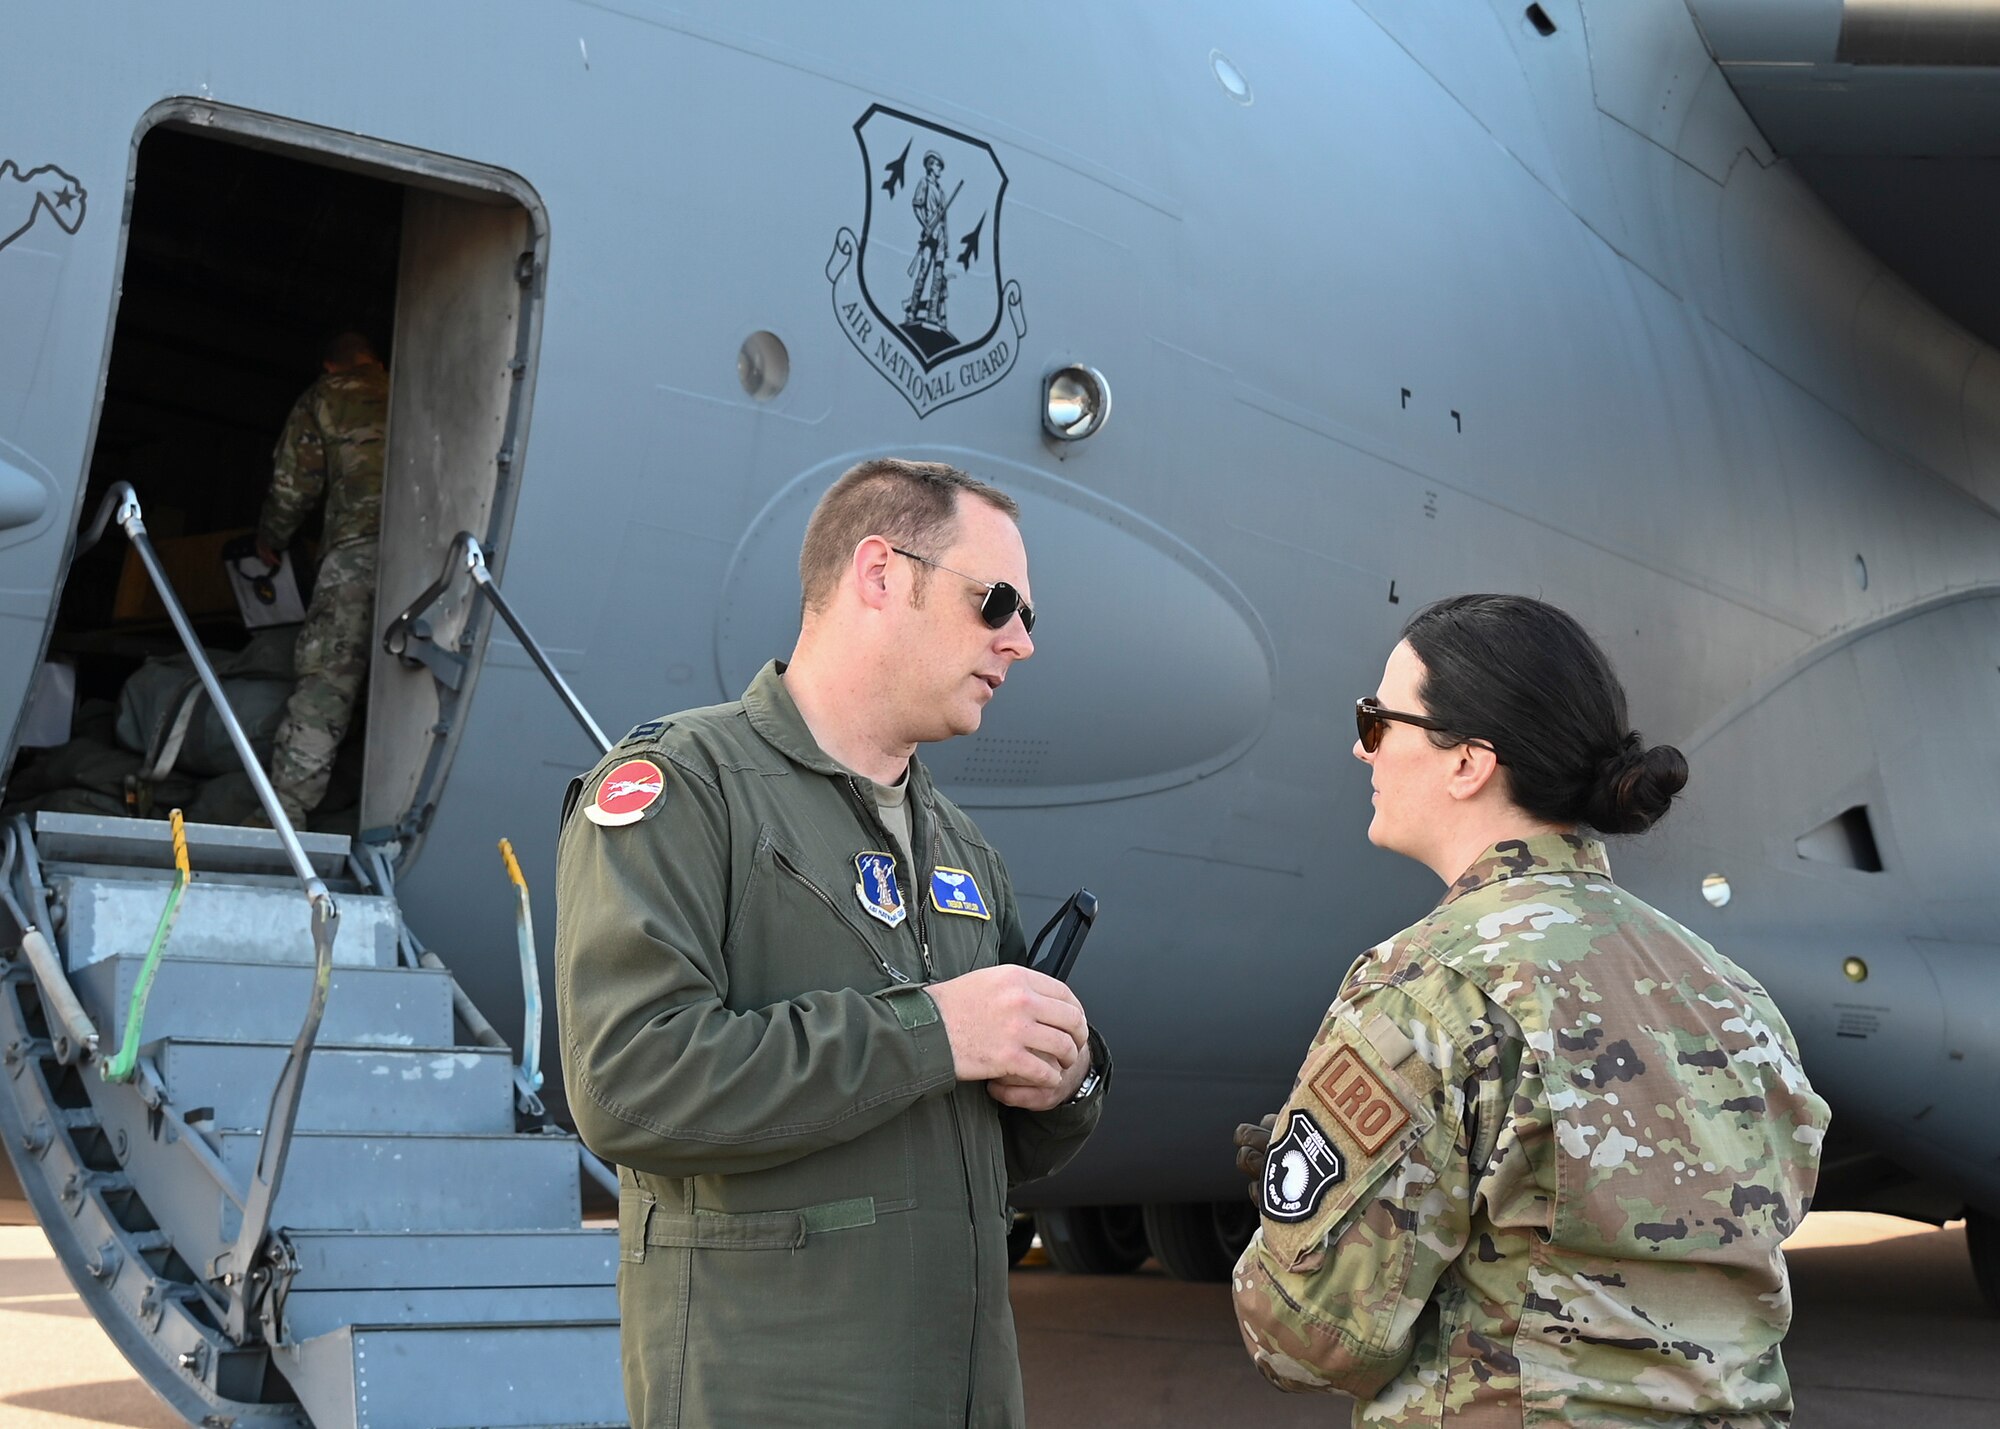 U.S. Air Force Capt. Trebor Taylor, a C-17 pilot assigned to the 167th Airlift Wing, West Virginia Air National Guard, speaks with U.S. Air Force Lt. Joanna Voss, an installation deployment officer assigned to the 175th Logistics Readiness Squadron, Maryland Air National Guard, during the DEFENDER-Europe 22 exercise, May 23, 2022, in Kuressaare, Estonia.